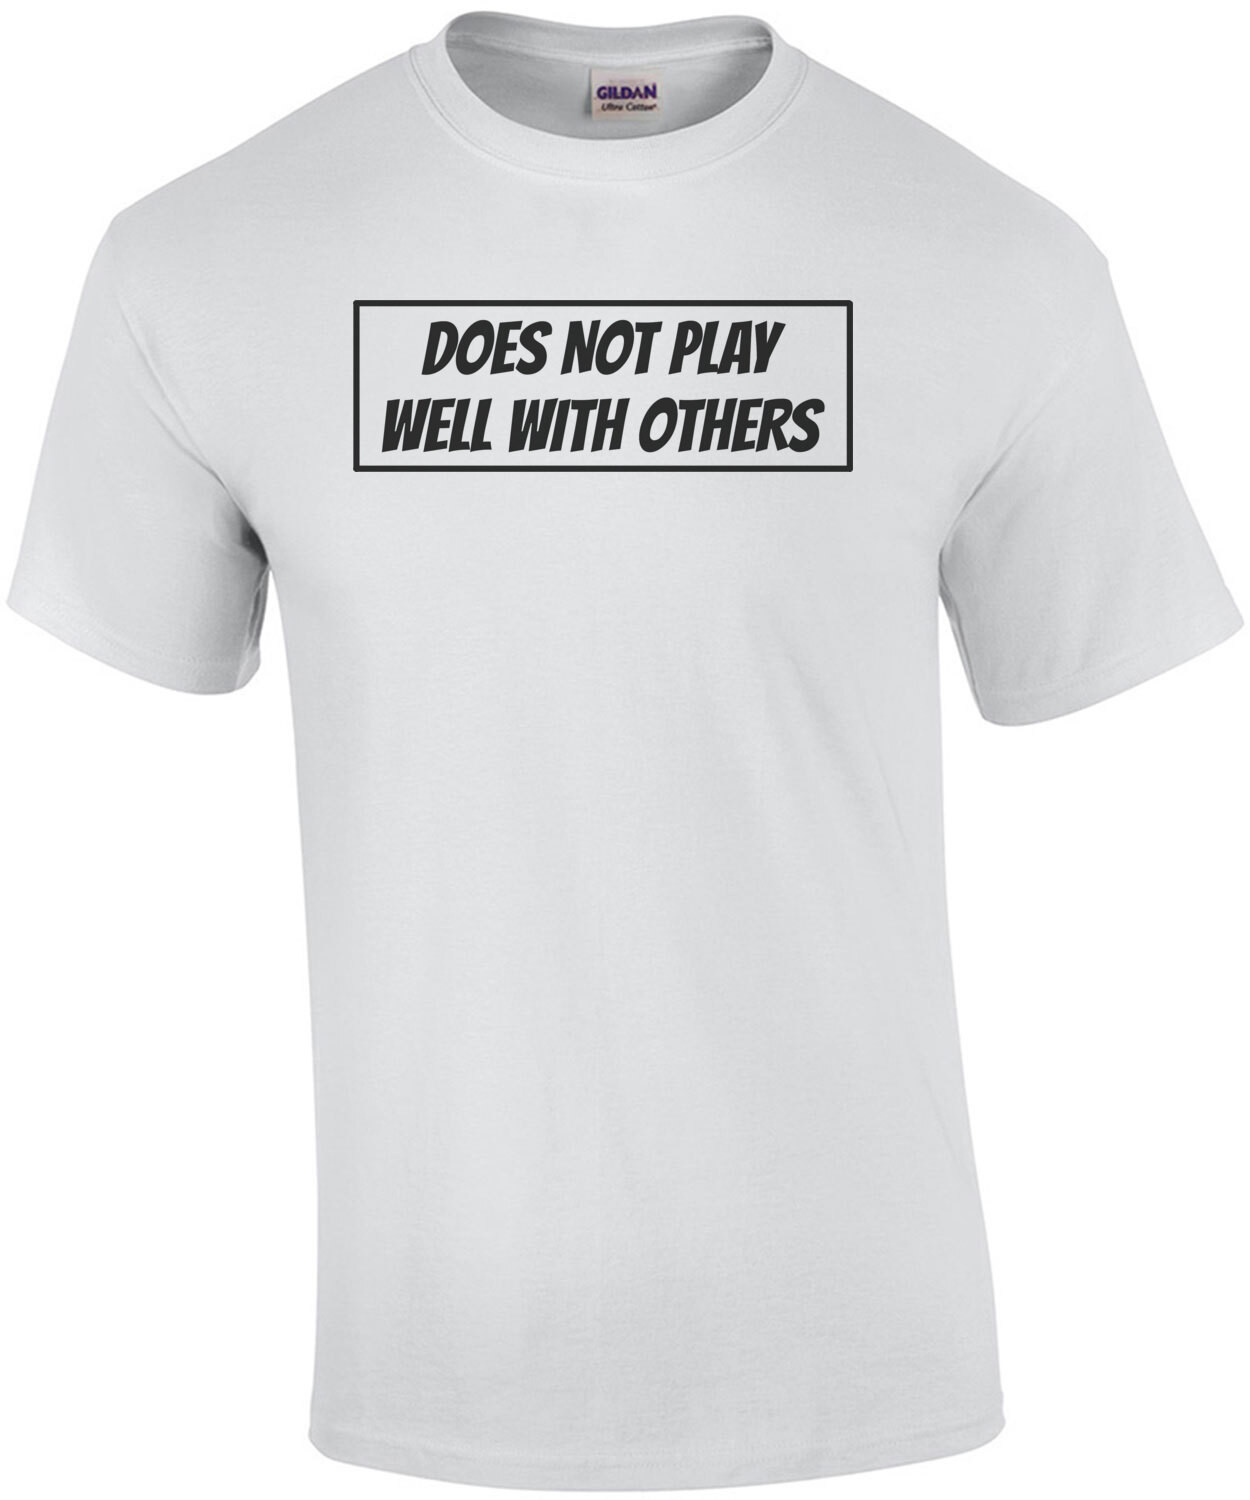 Does not play well with others. T-Shirt